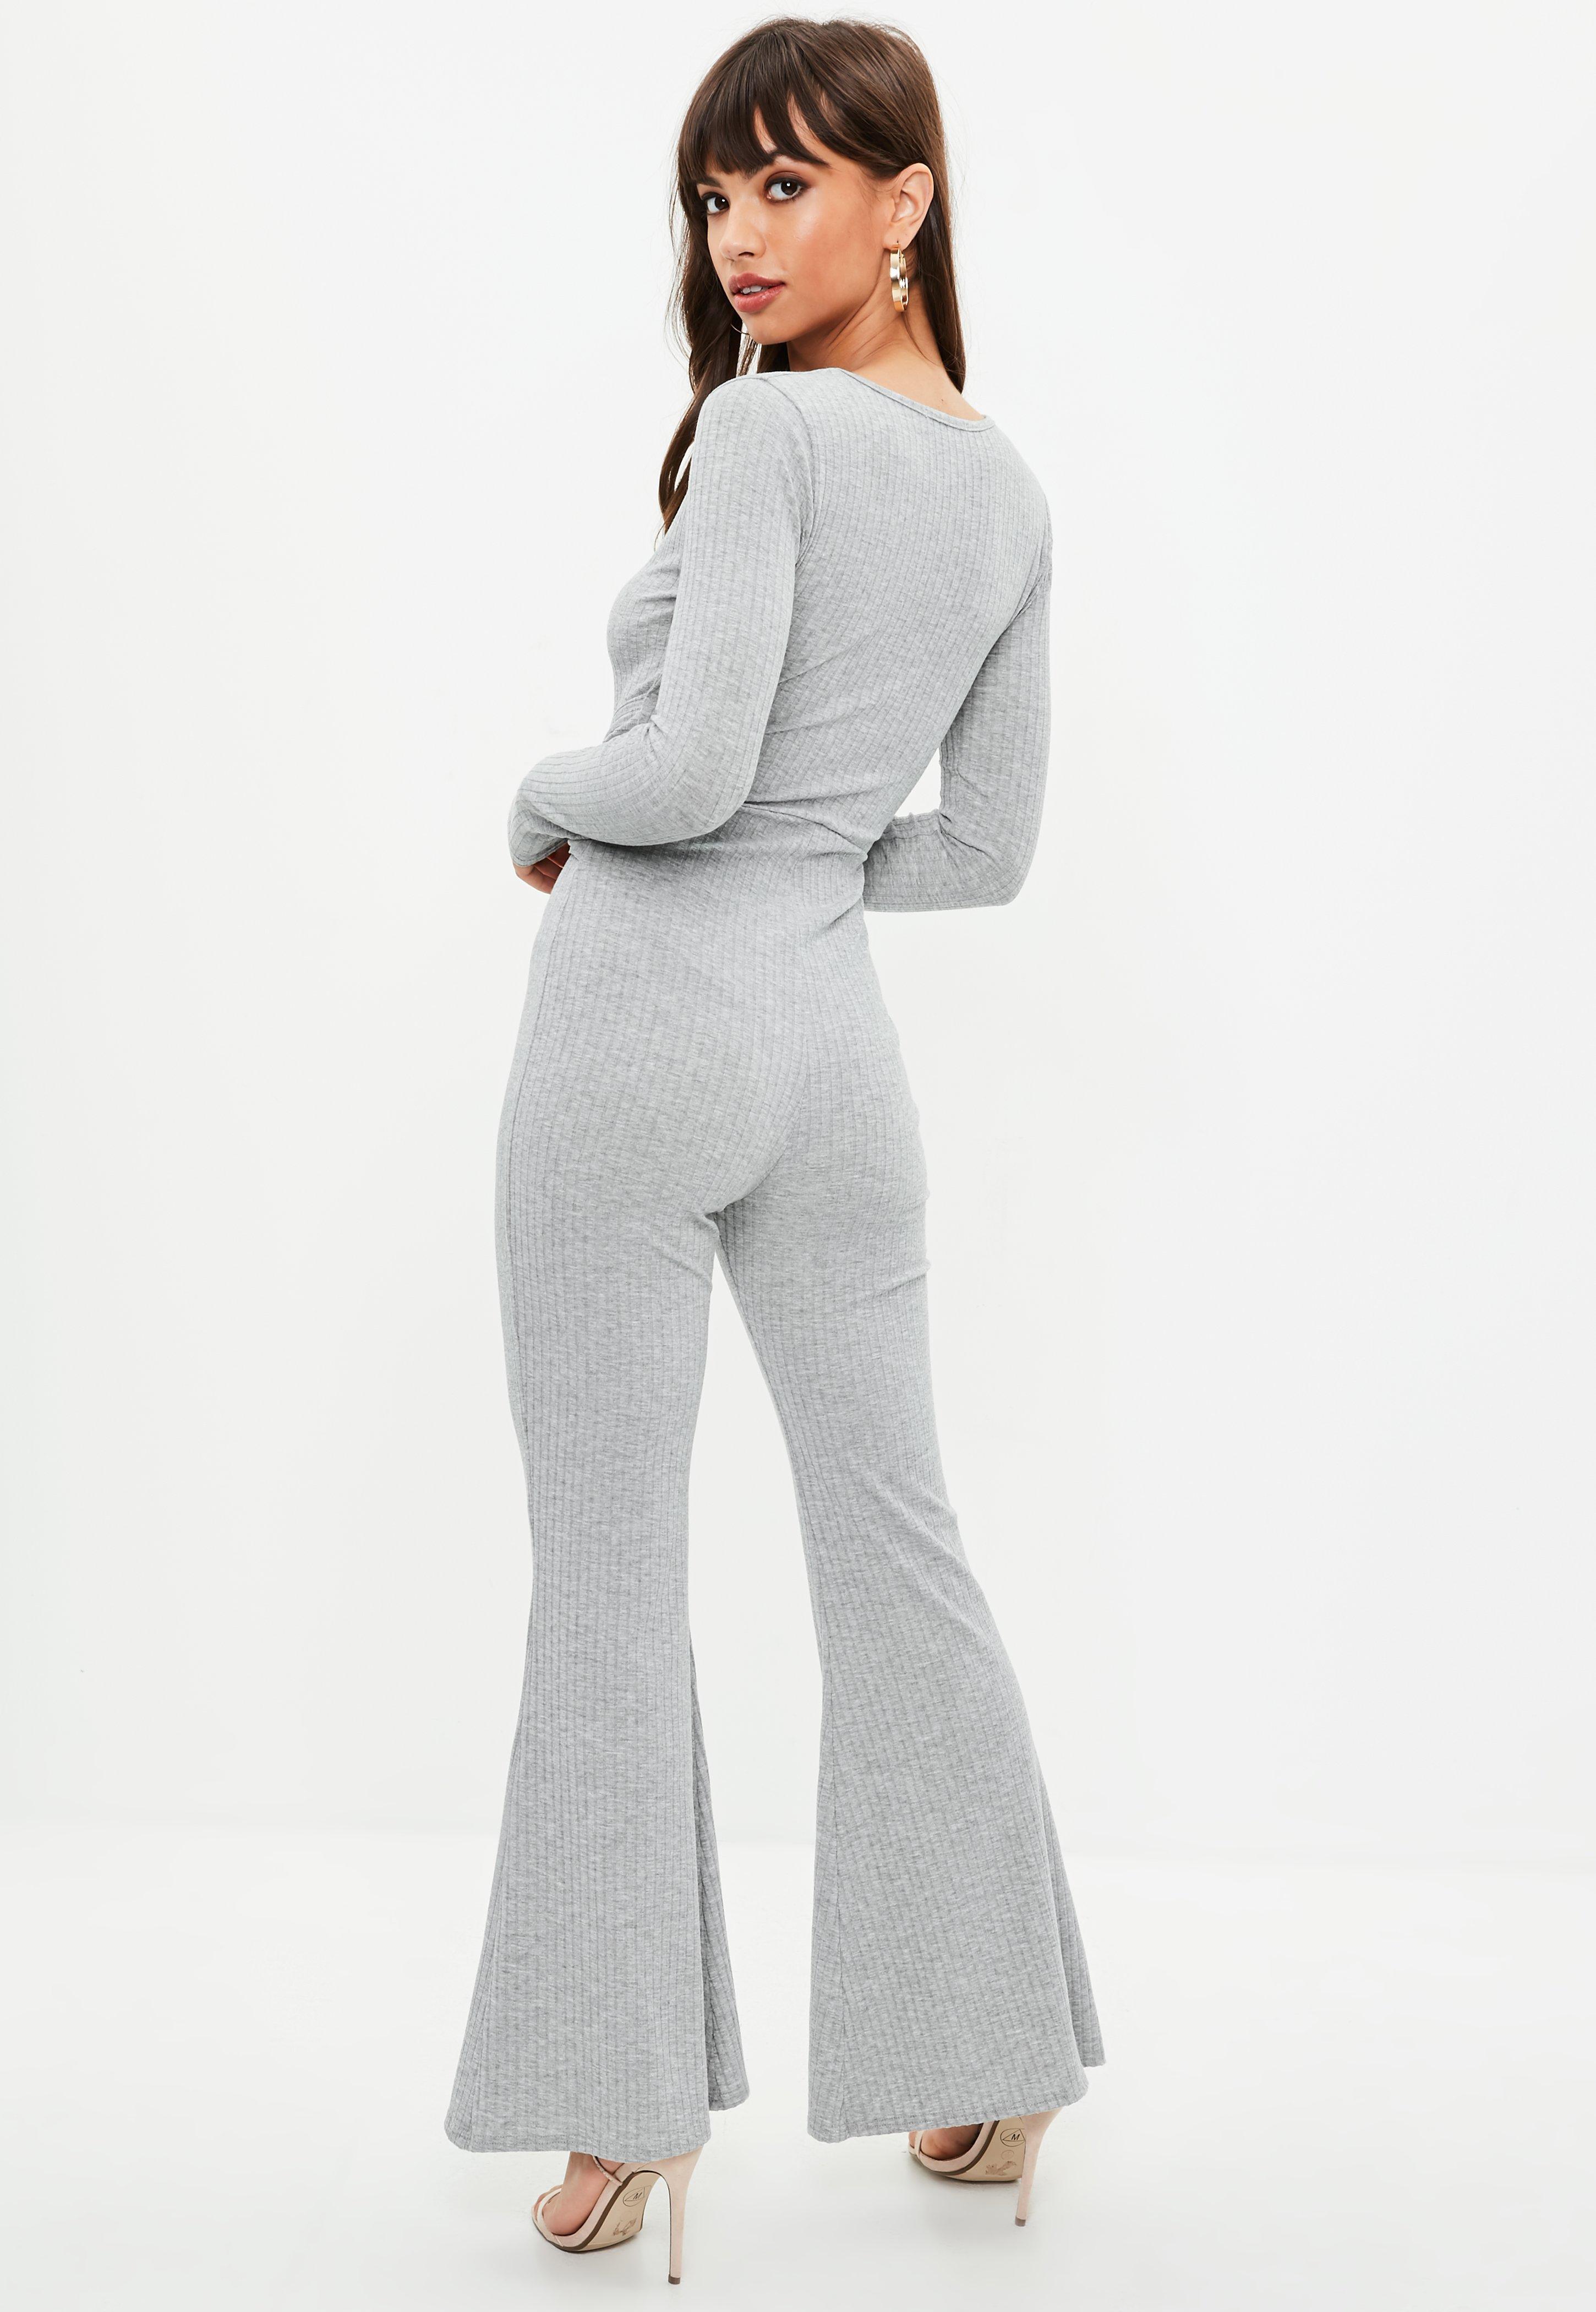 Lyst - Missguided Grey V Front Ribbed Tie Waist Jumpsuit in Gray